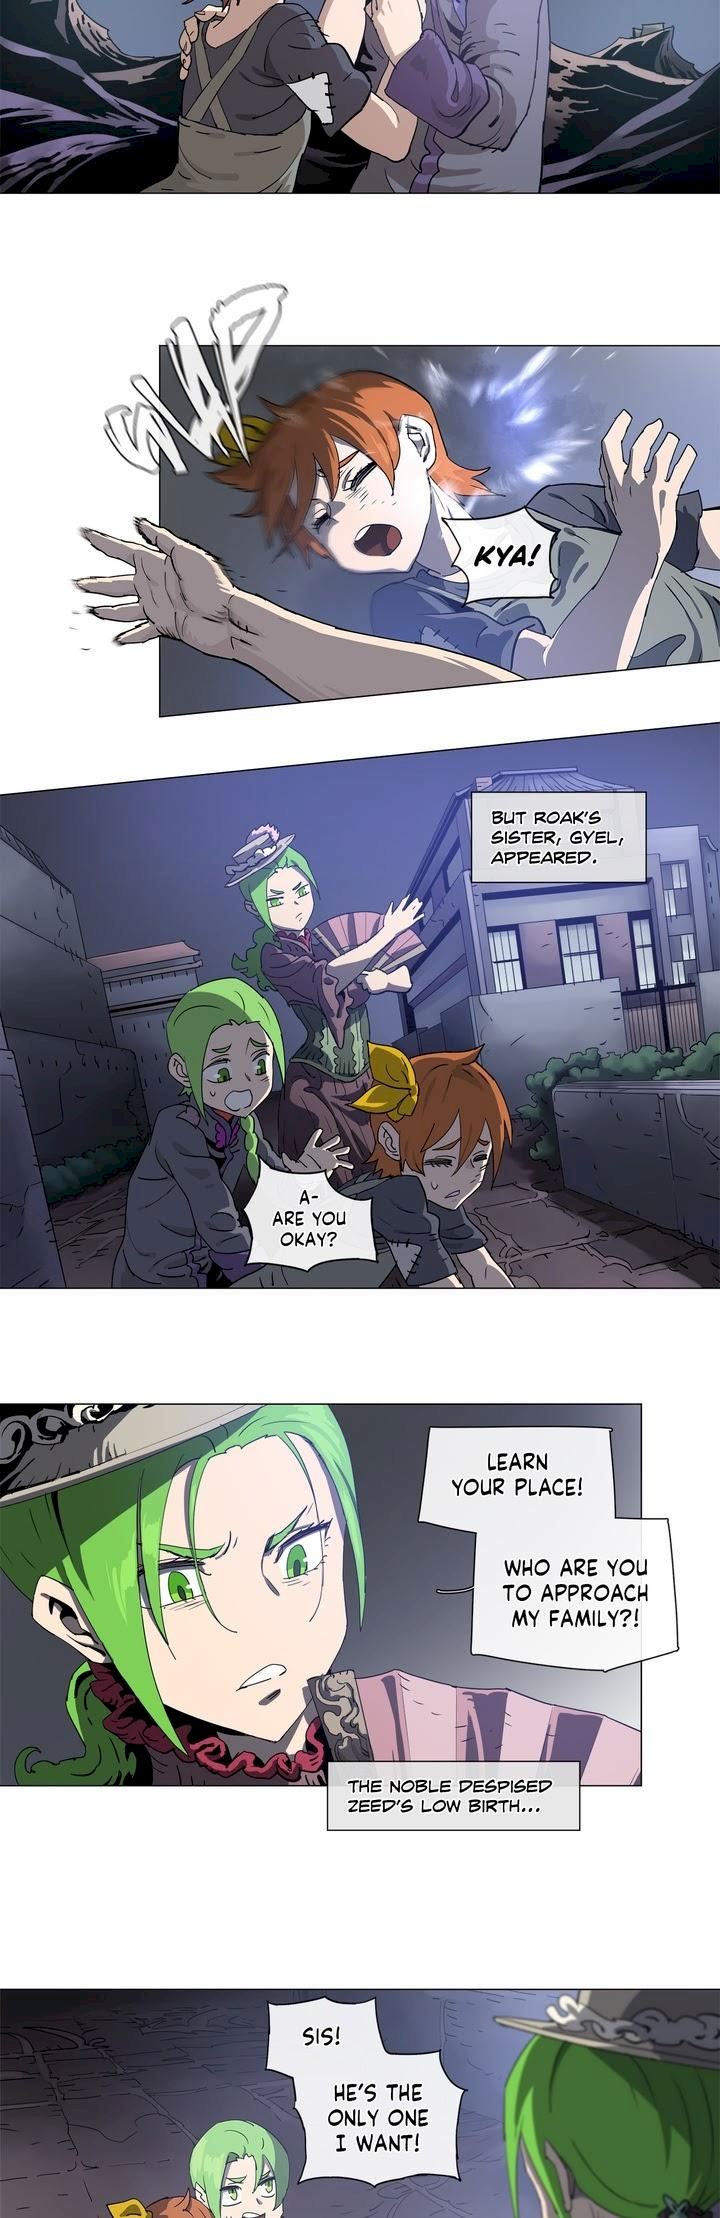 4 Cut Hero - Chapter 119 Page 2